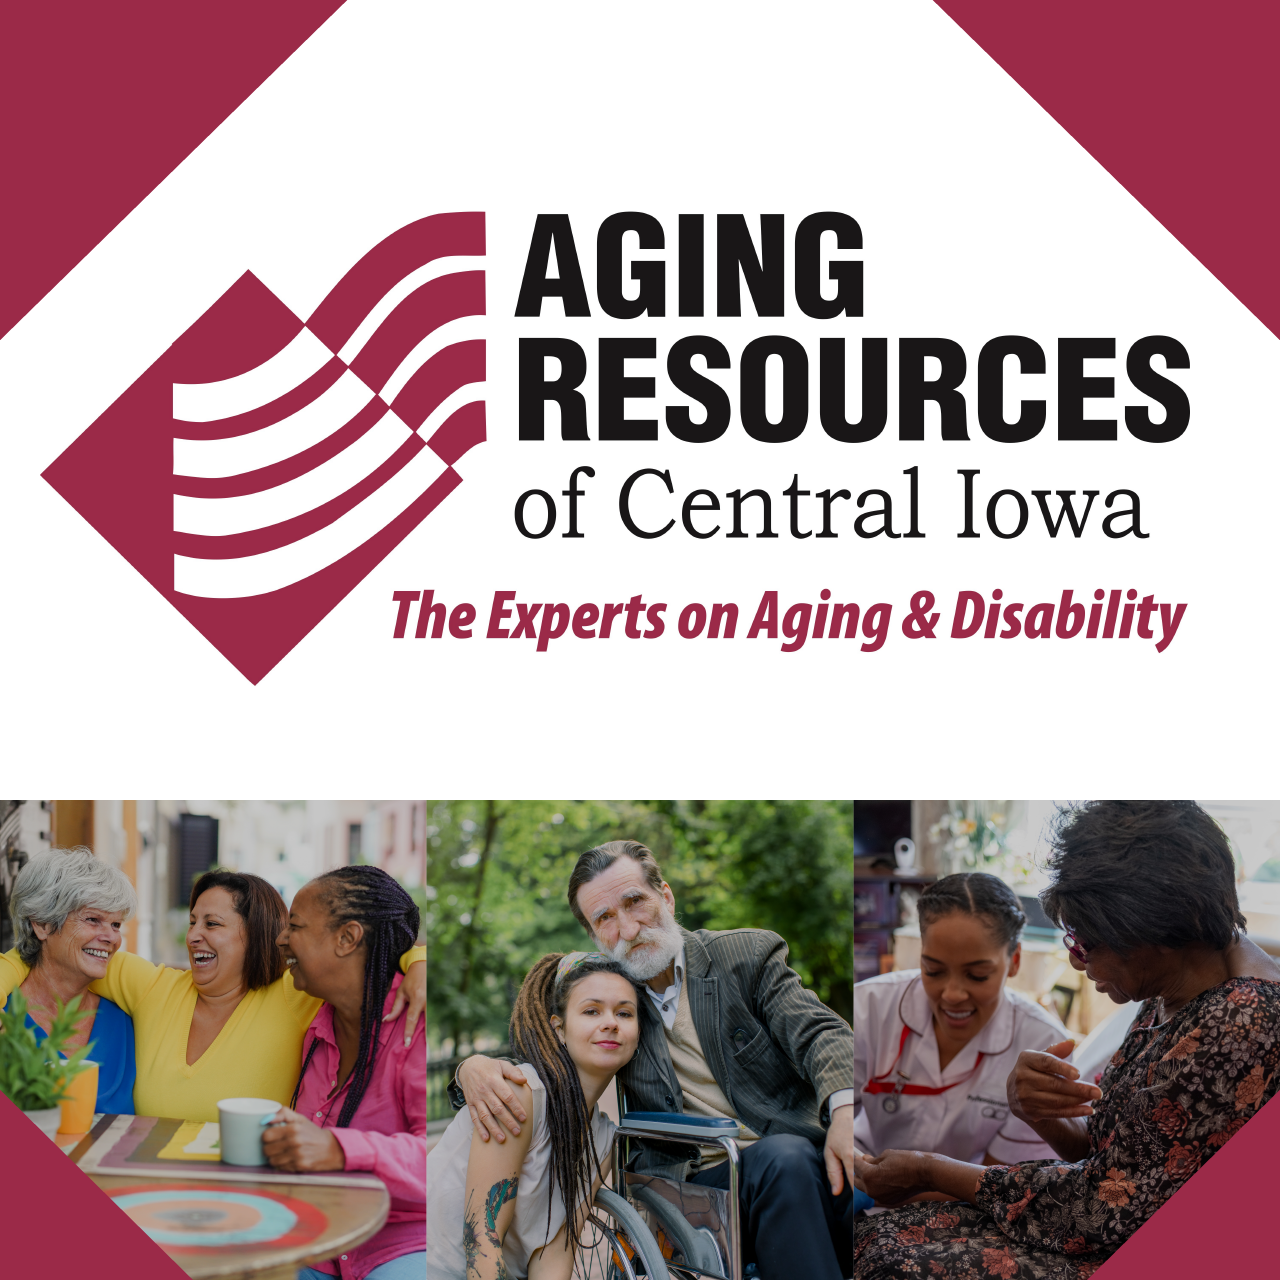 Aging Resources of Central Iowa